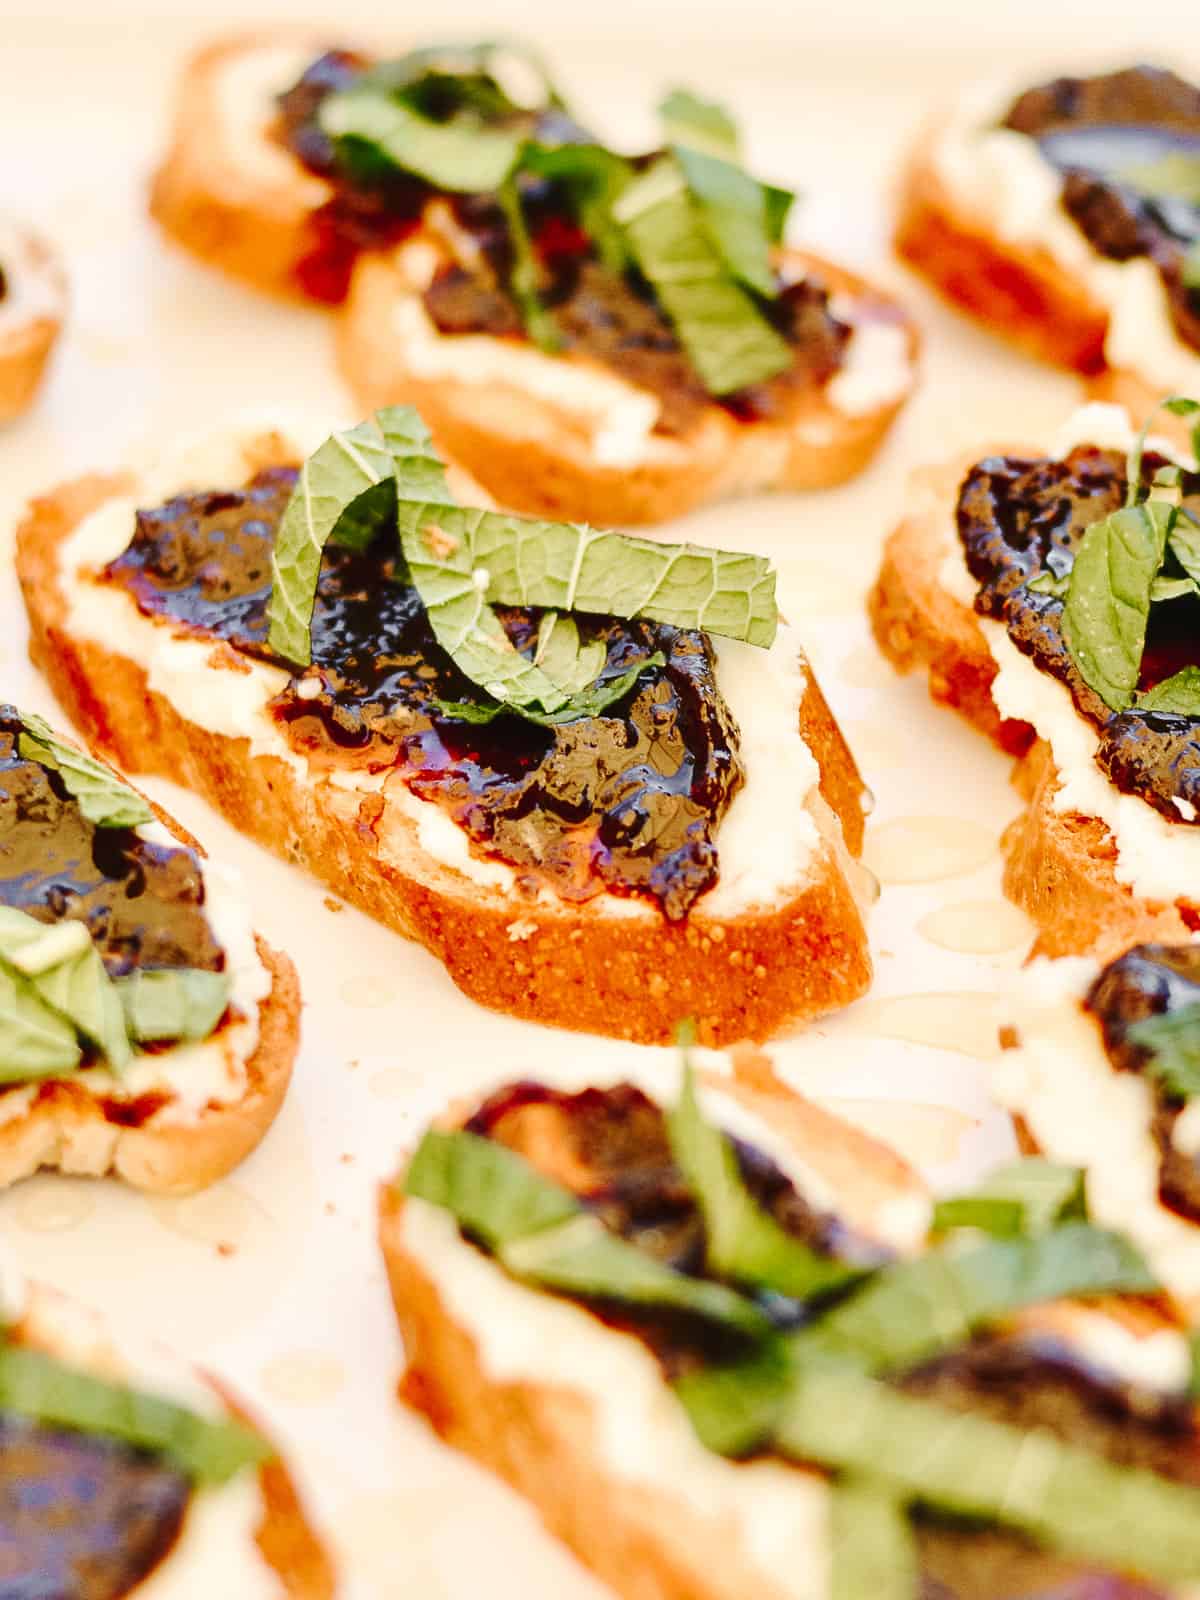 Goat cheese on top of bread slices with fig jam and sliced mint leaves.